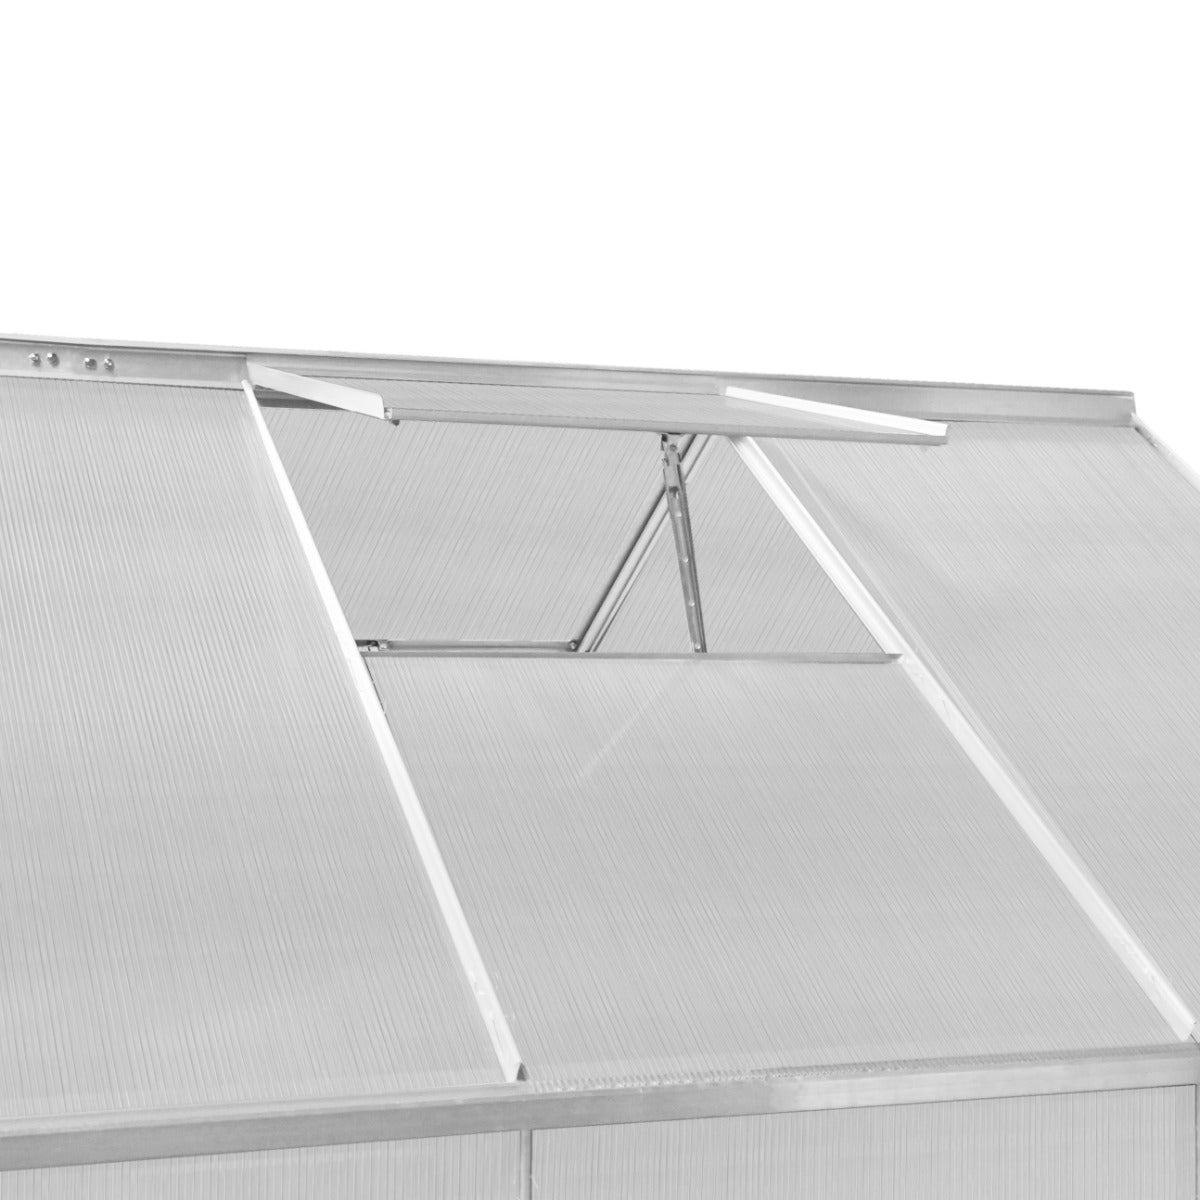 Polycarbonate Greenhouse 6ft x 6ft – Silver